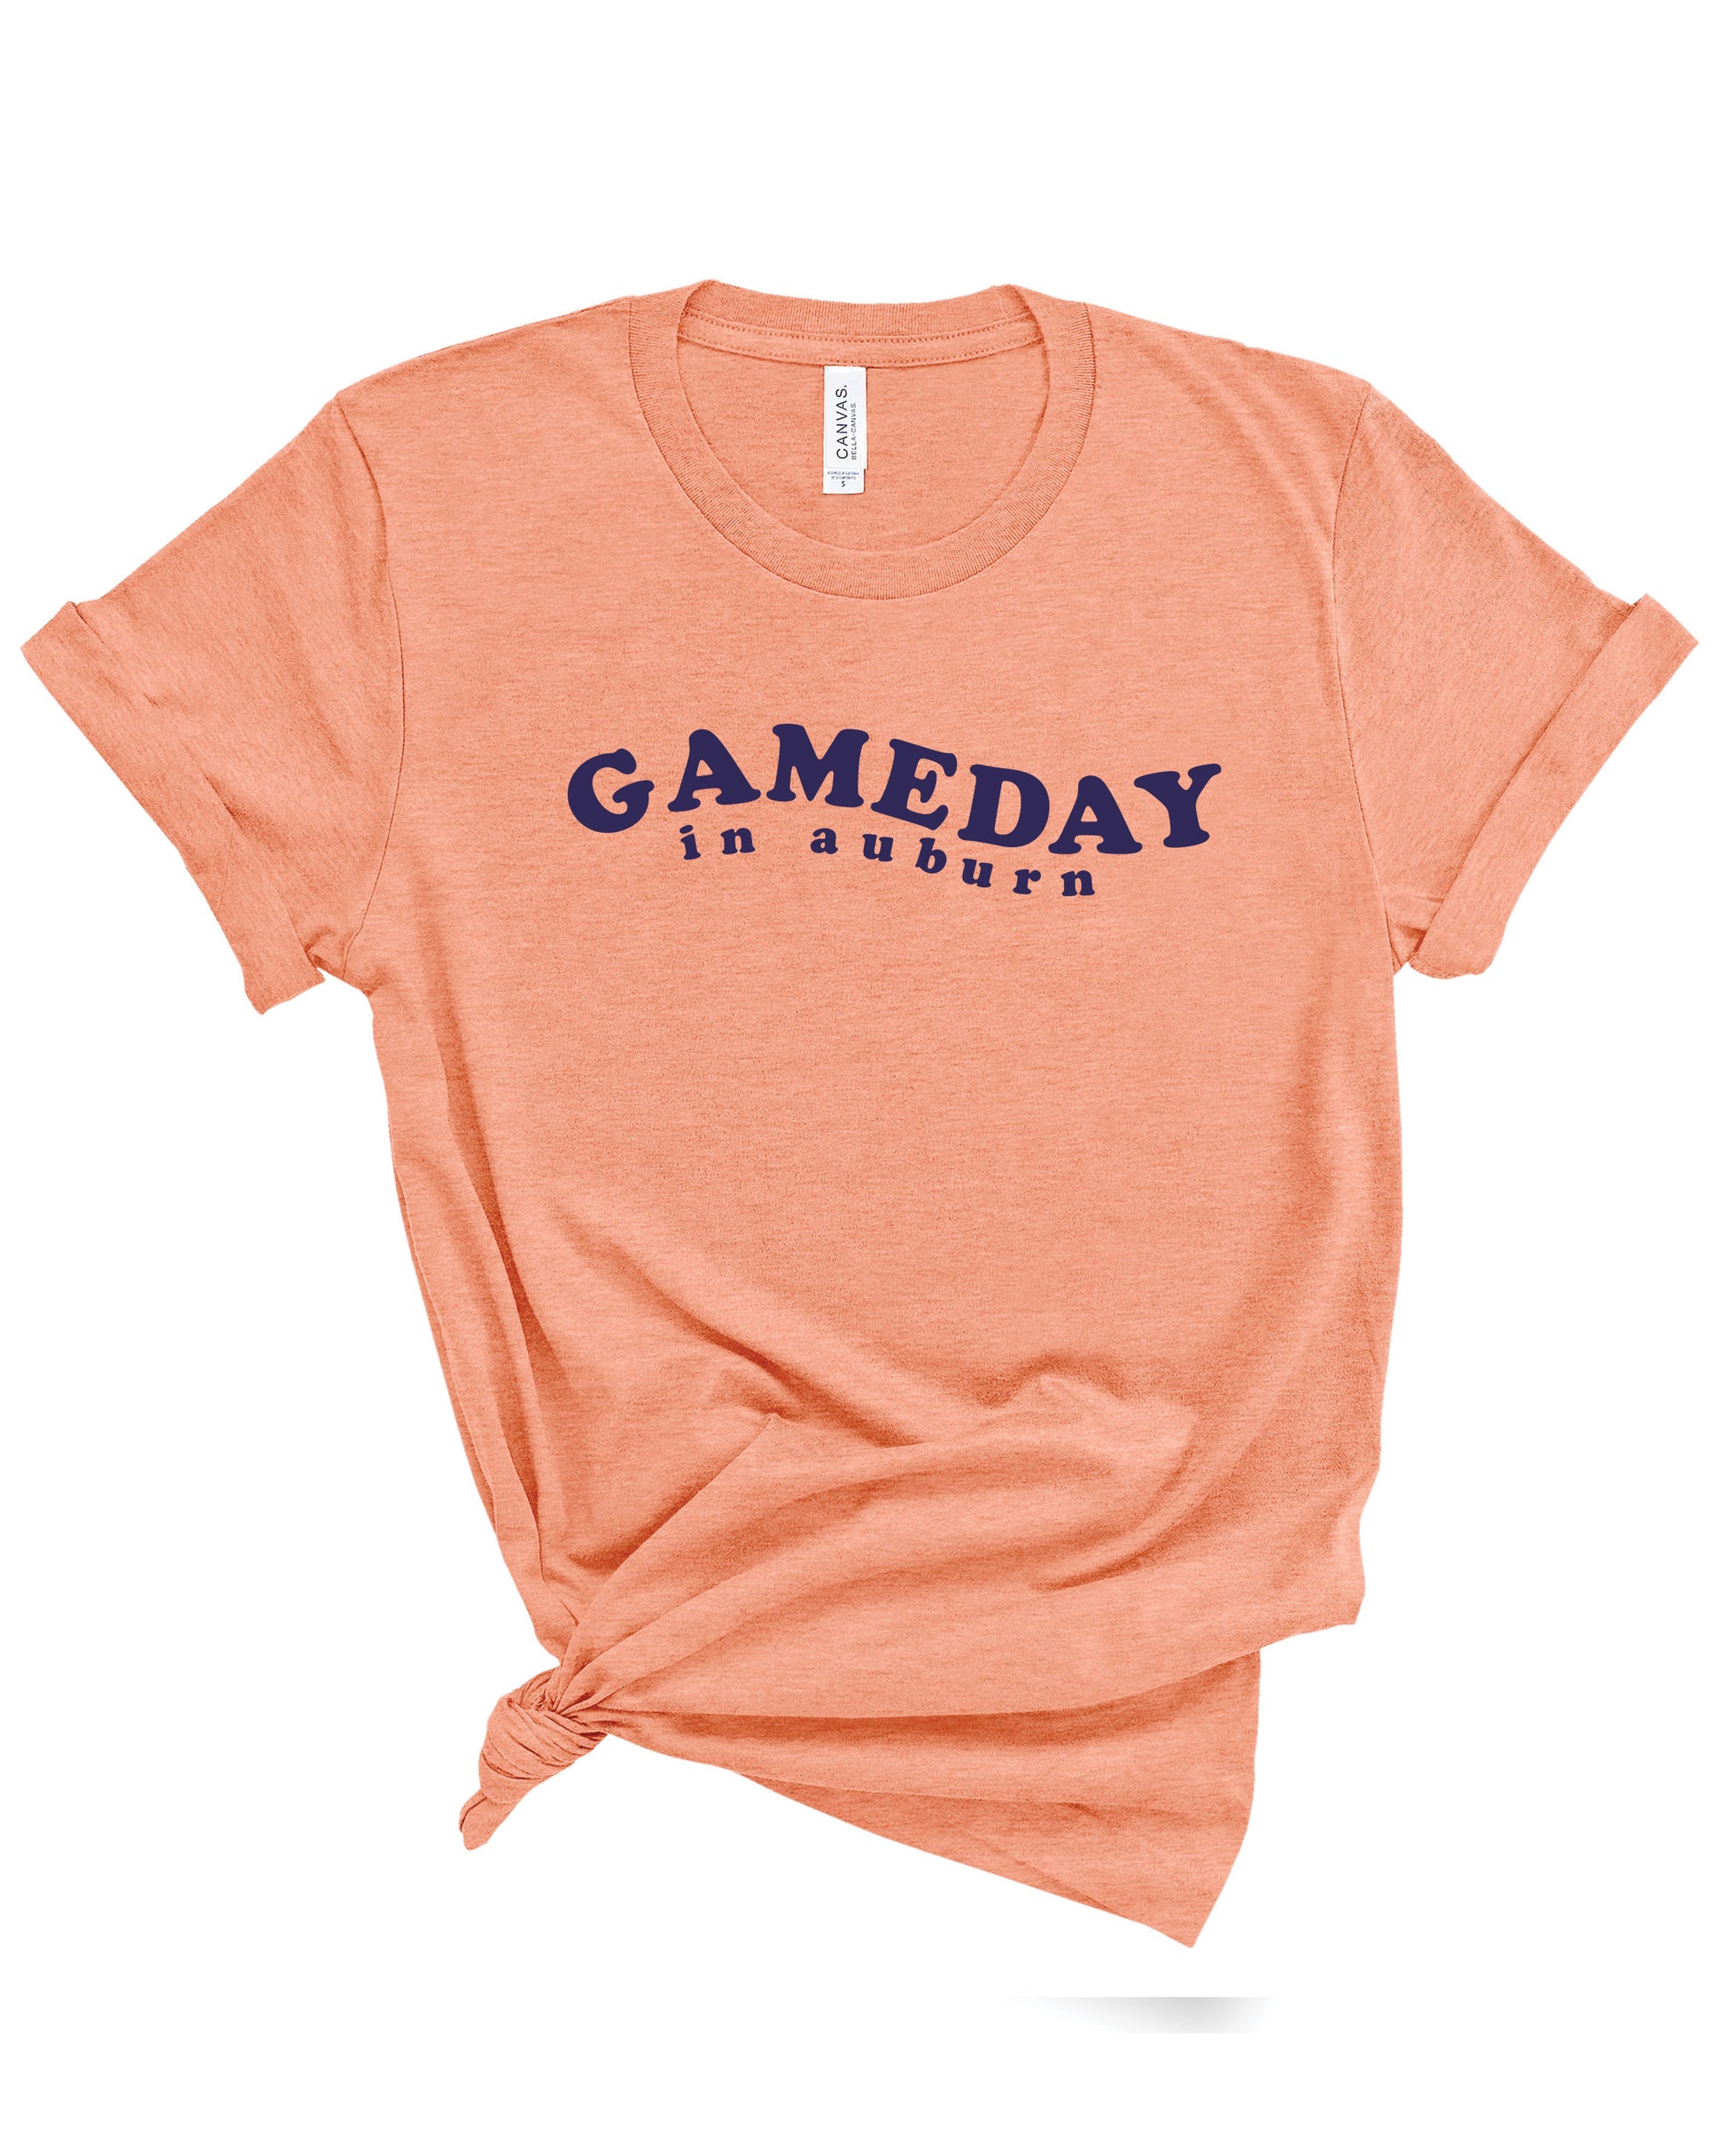 Gameday in Auburn | Adult Tee-Kids Tees-Sister Shirts-Sister Shirts, Cute & Custom Tees for Mama & Littles in Trussville, Alabama.